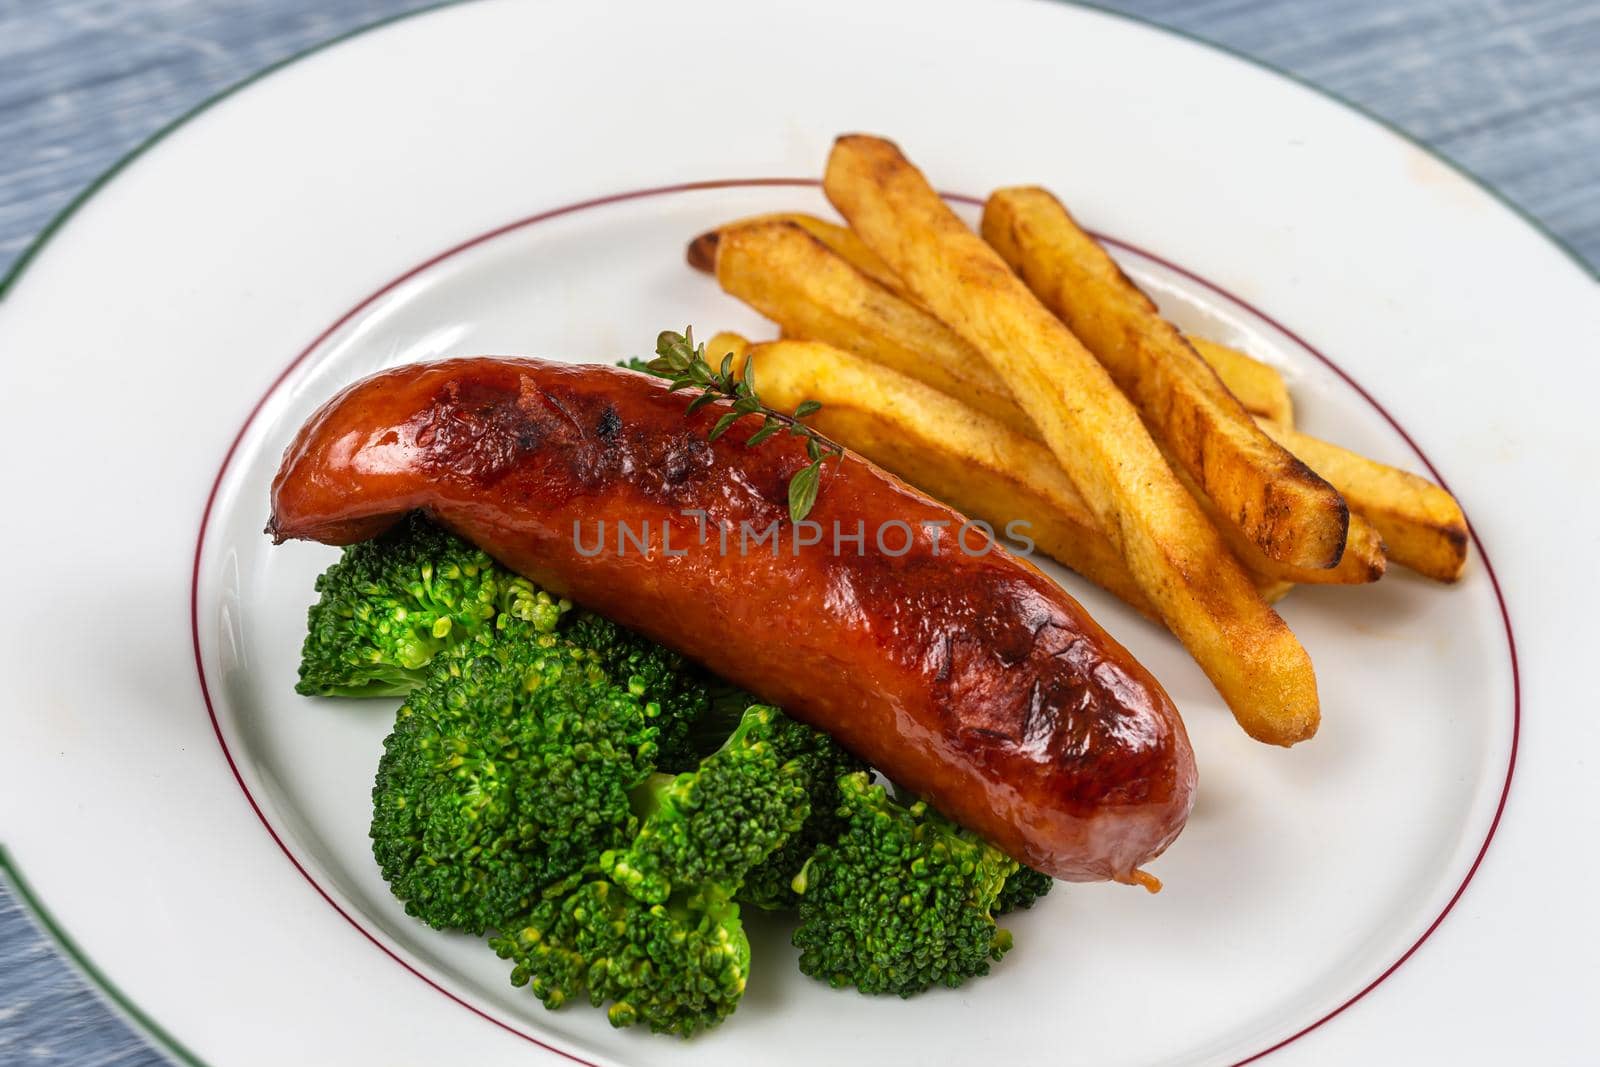 Montb liard sausage accompanied by broccoli and fries